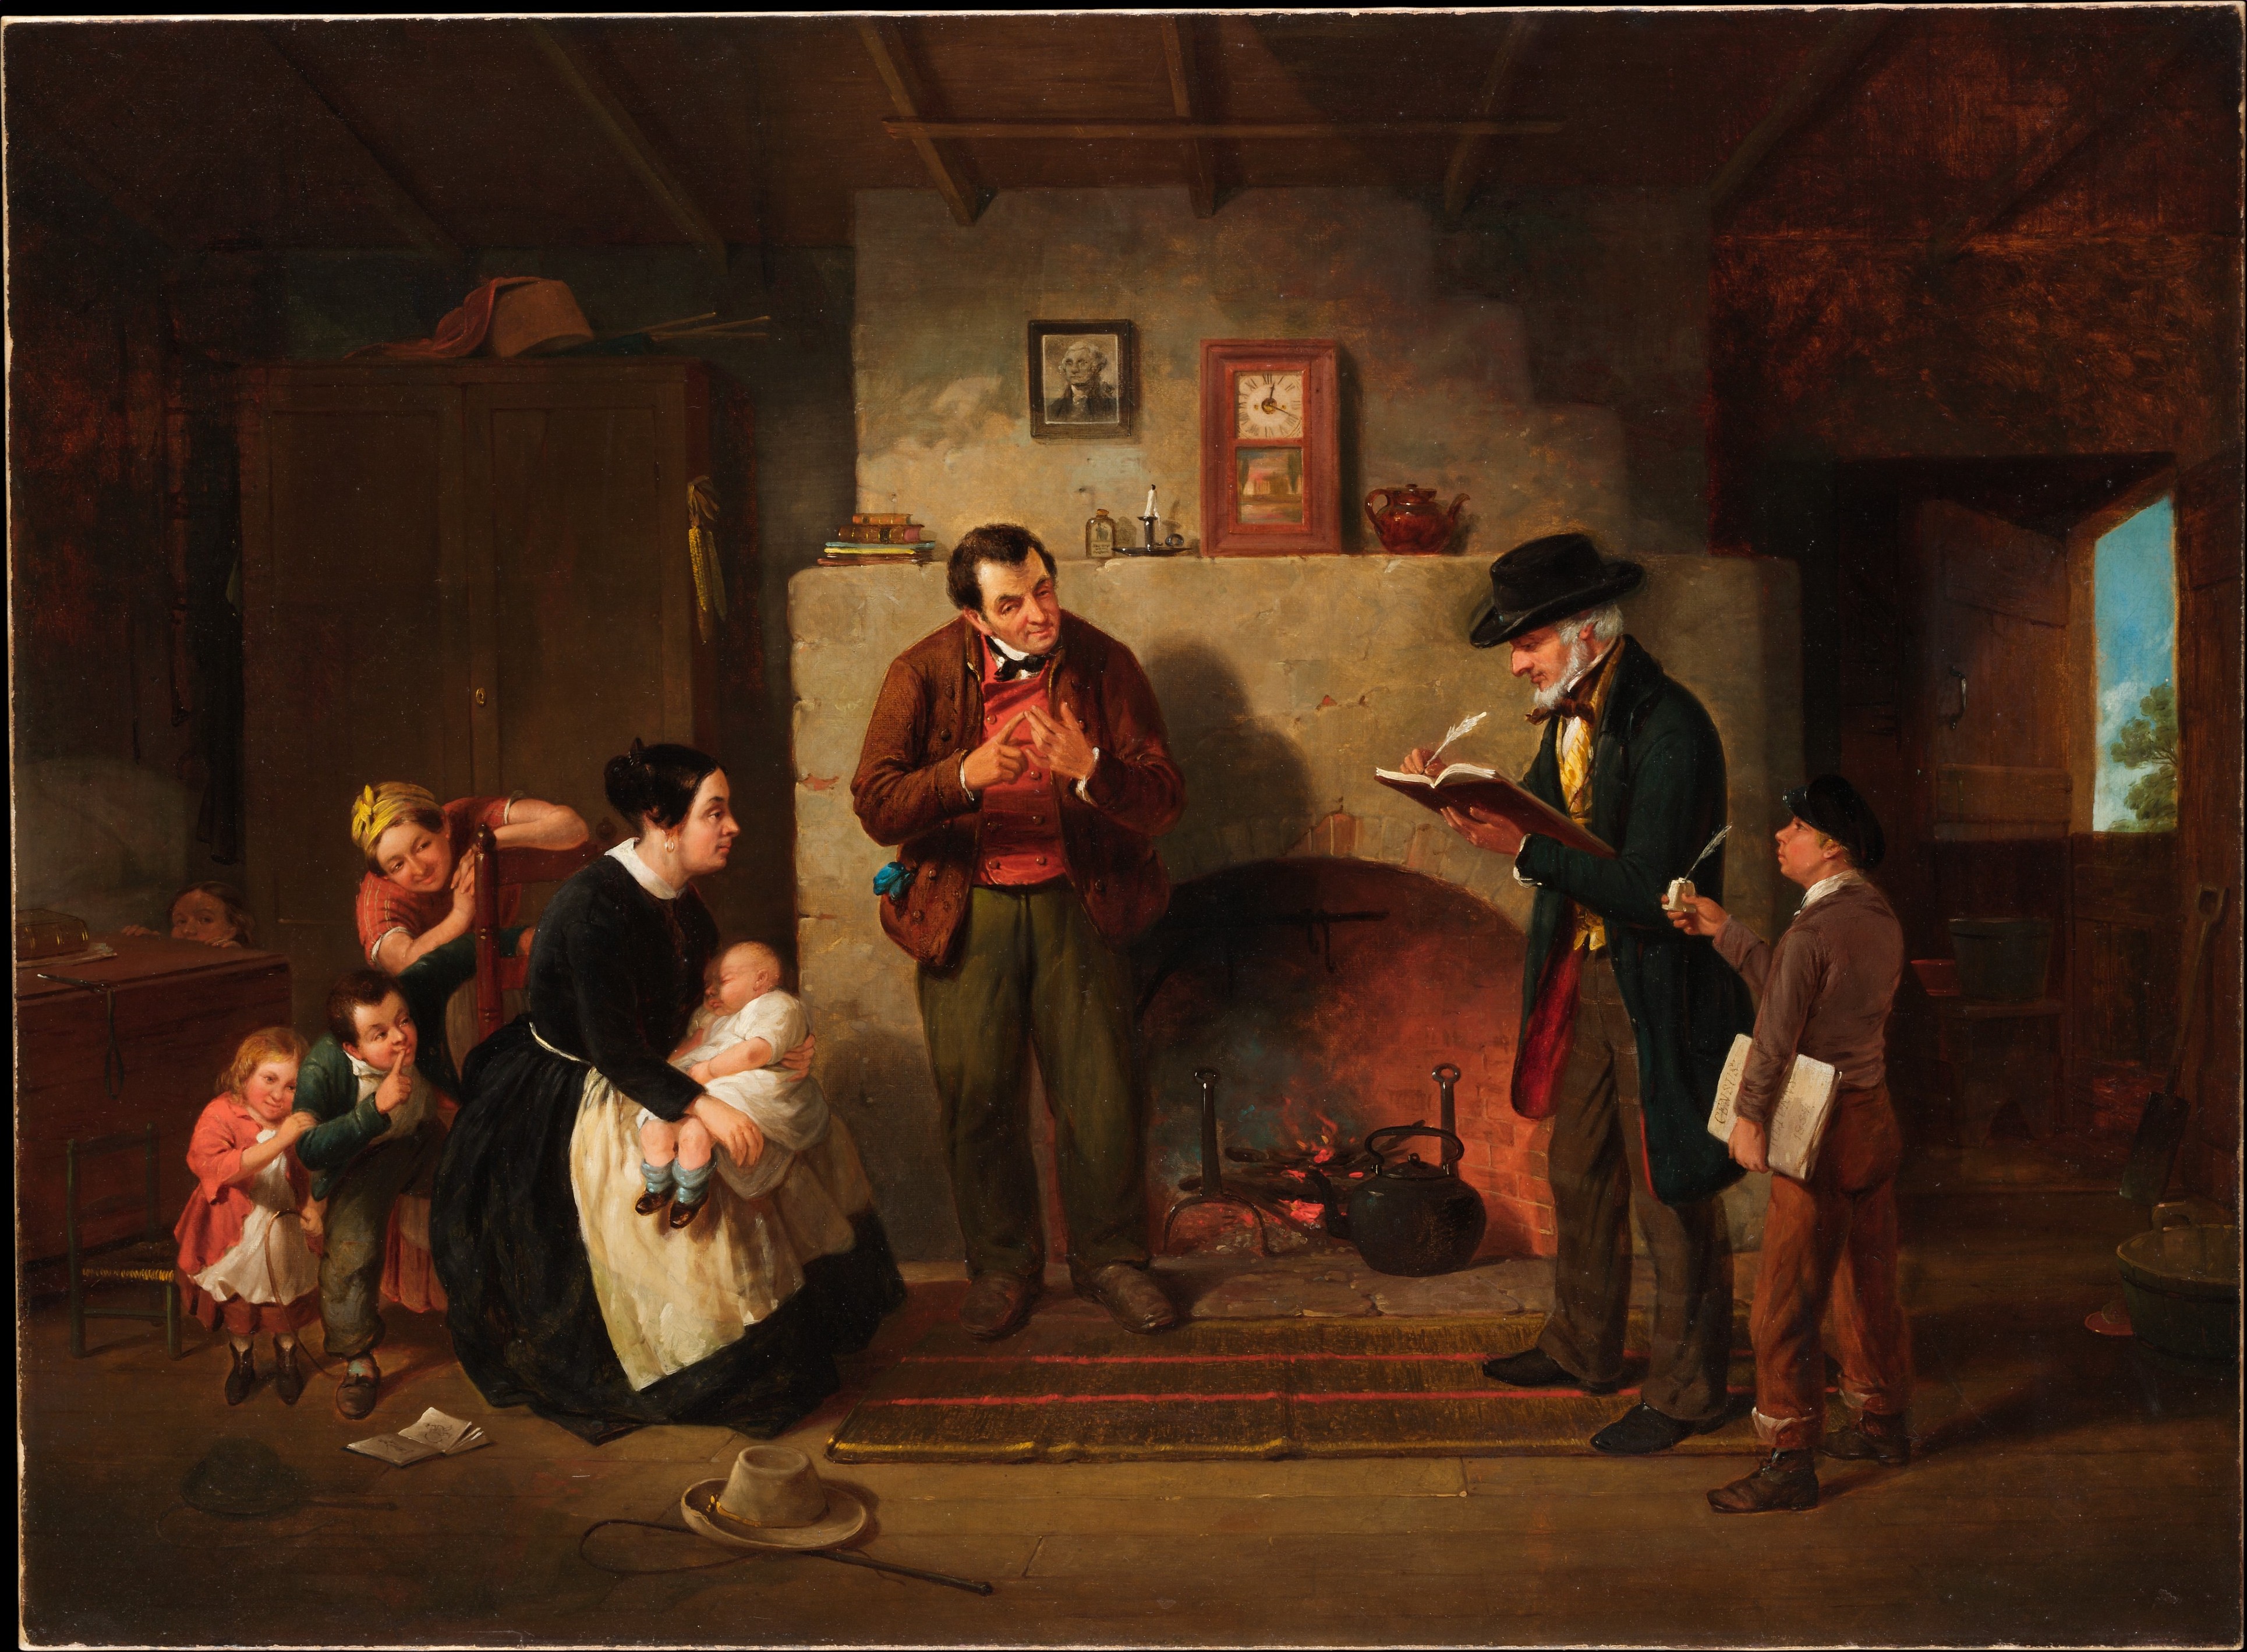 image of family being counted by the census taker, described below